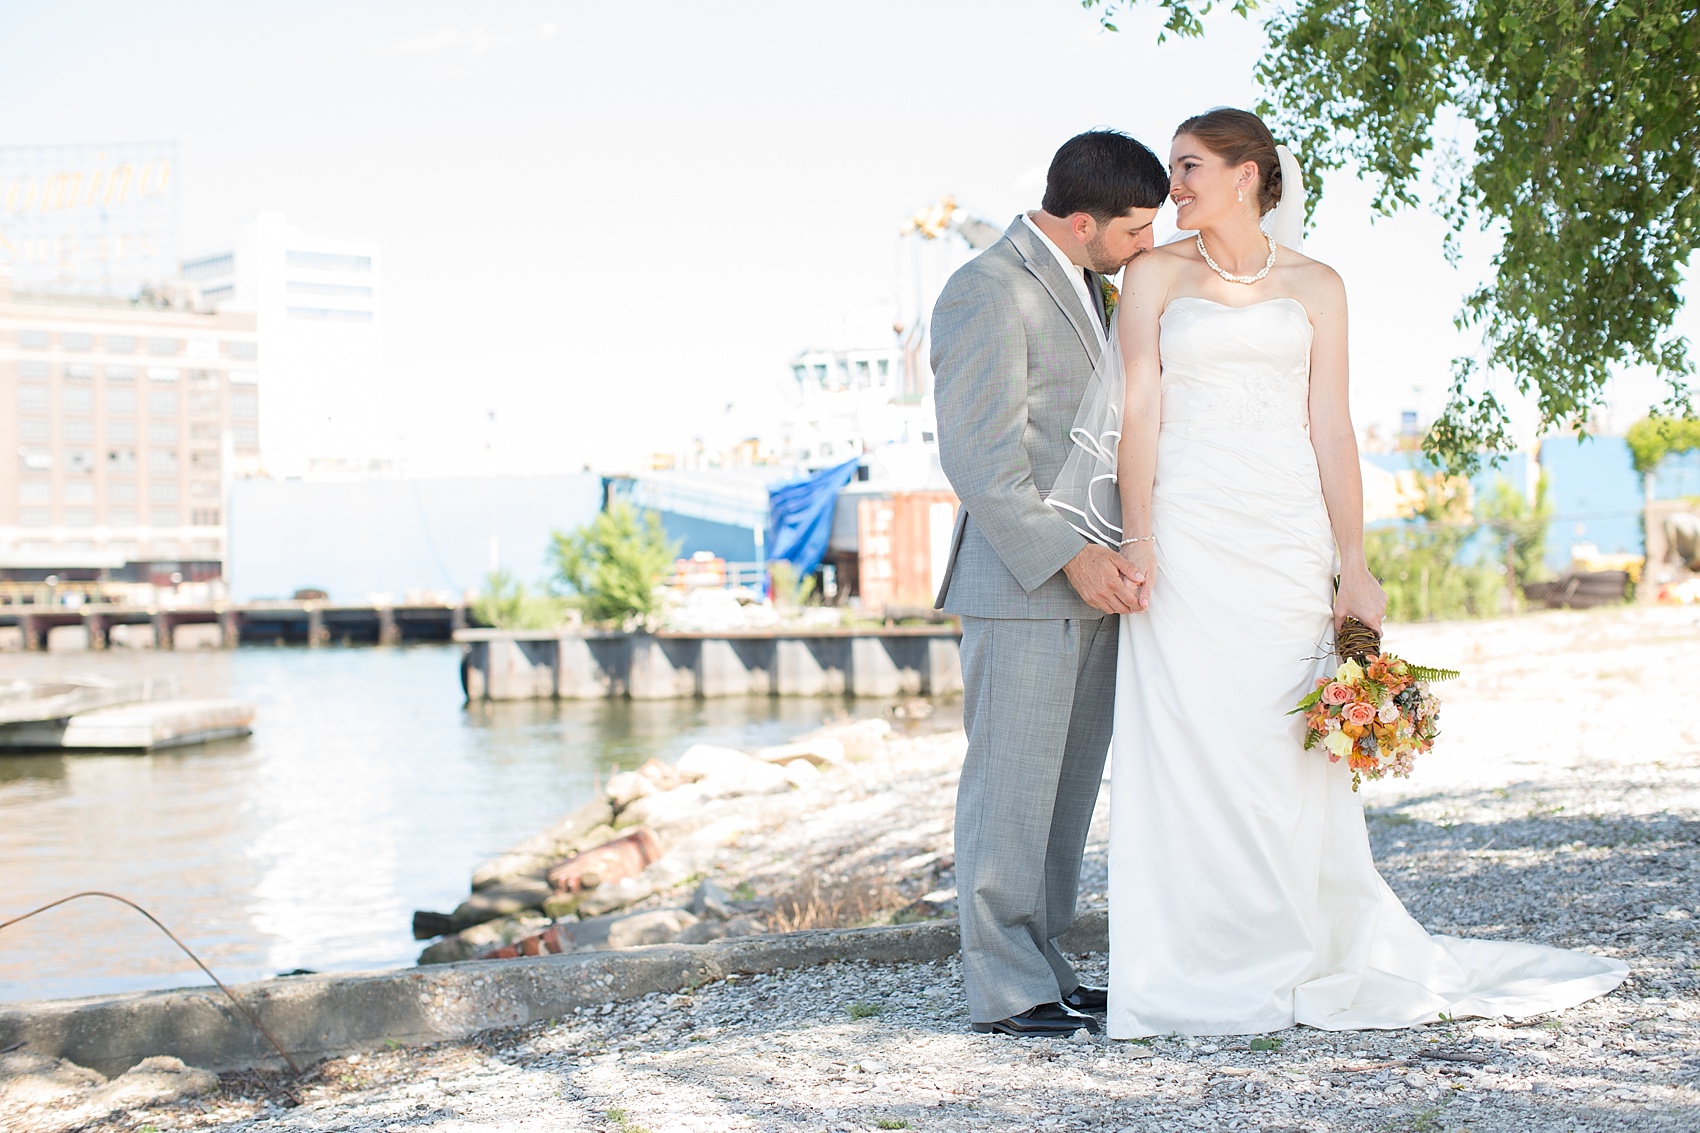 Bride and groom's photos at Baltimore, Maryland Museum of Industry. Photos by Mikkel Paige Photography.